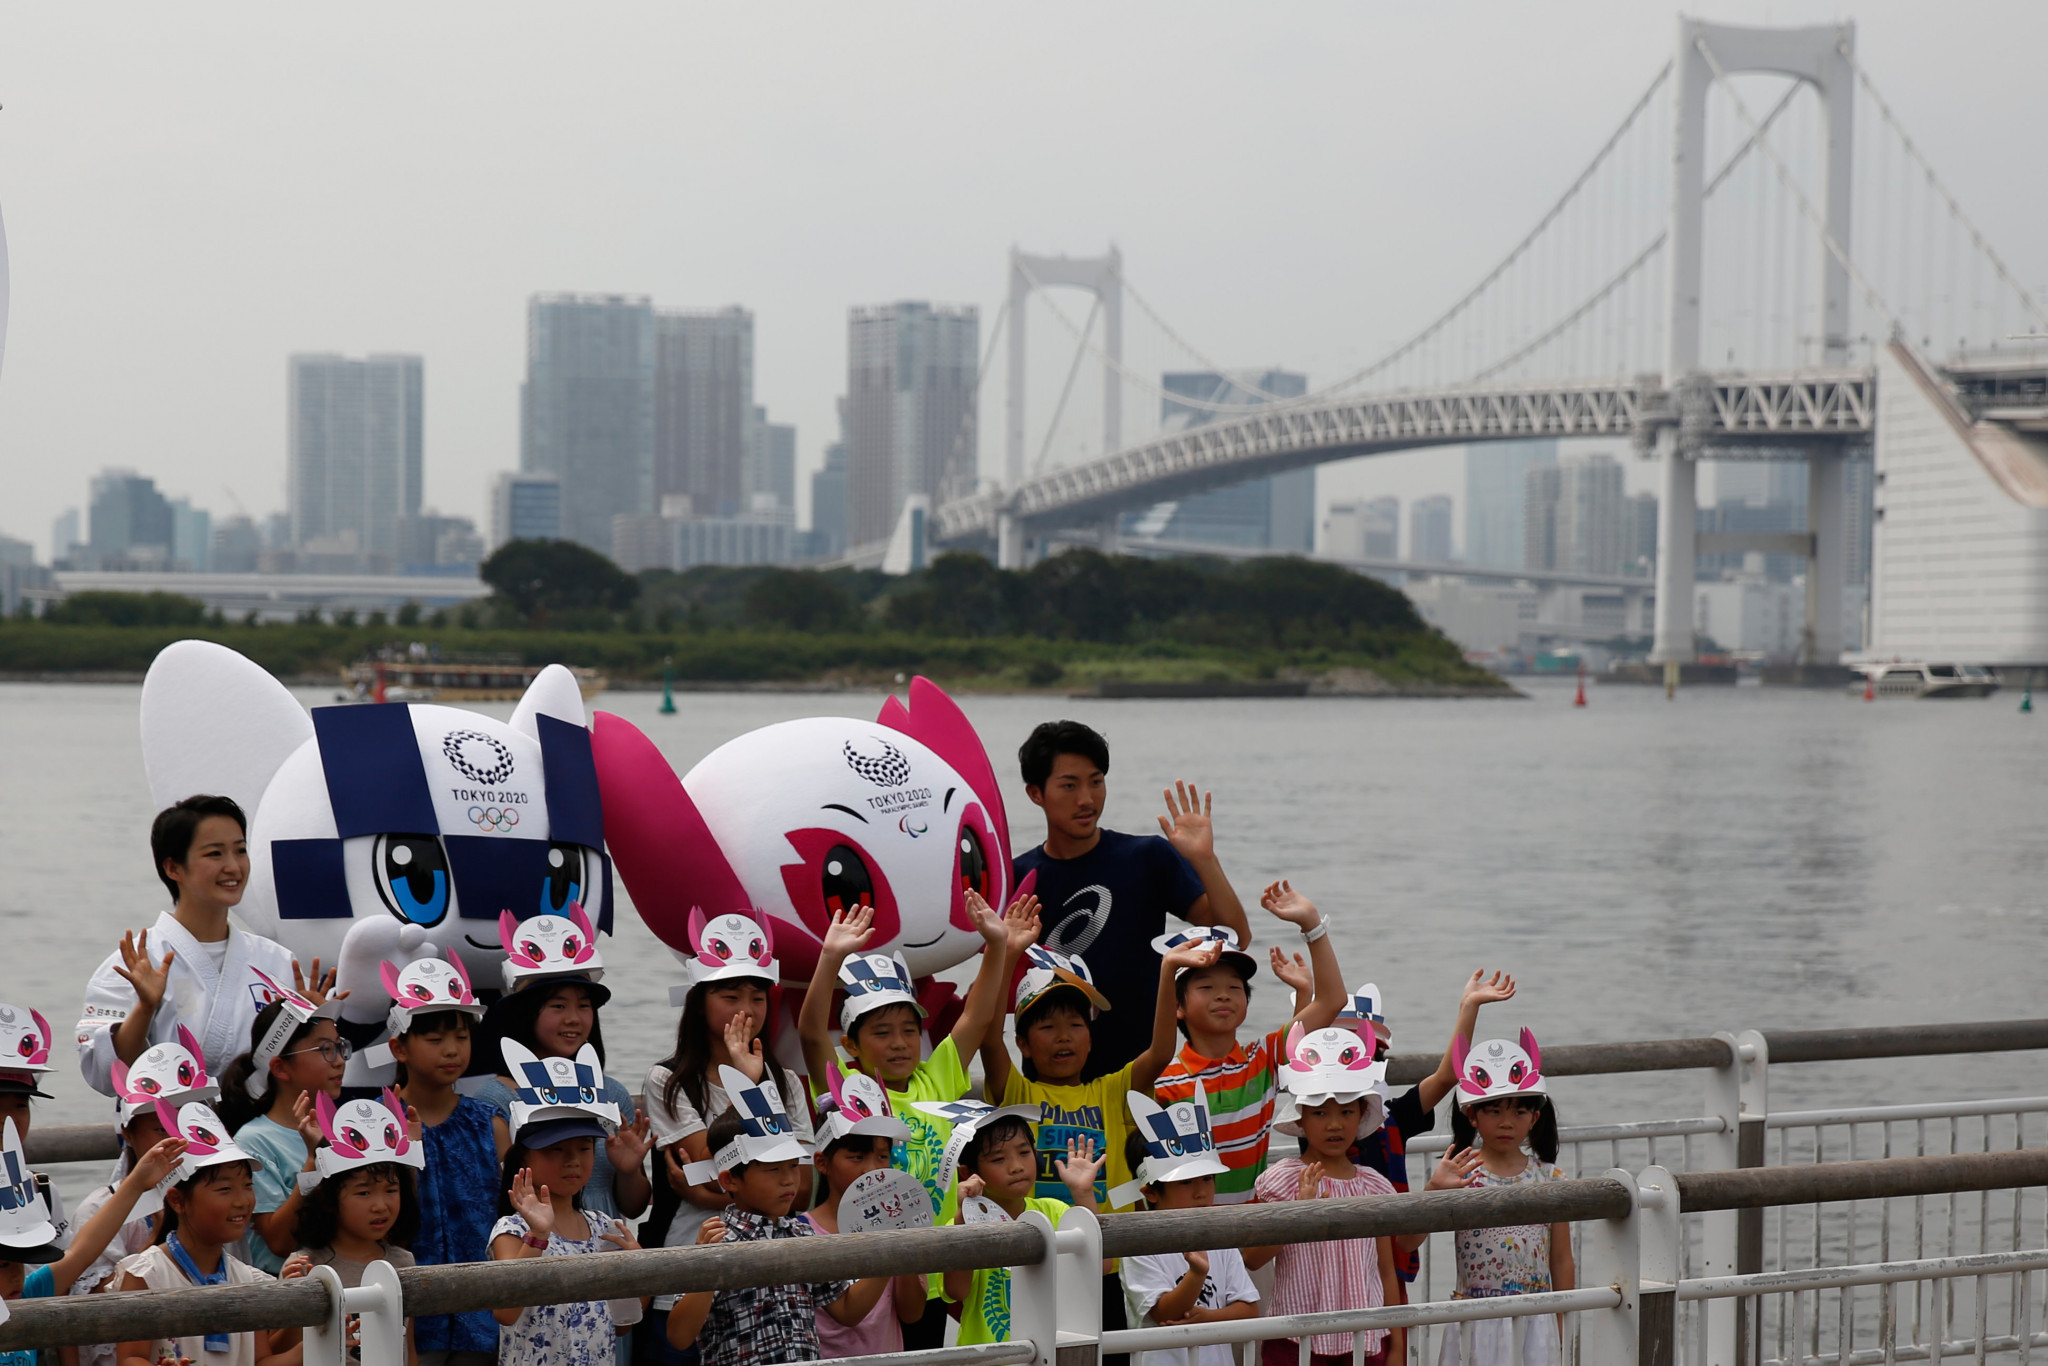 Tokyo 2020 announce positive test results after water quality fears at venue